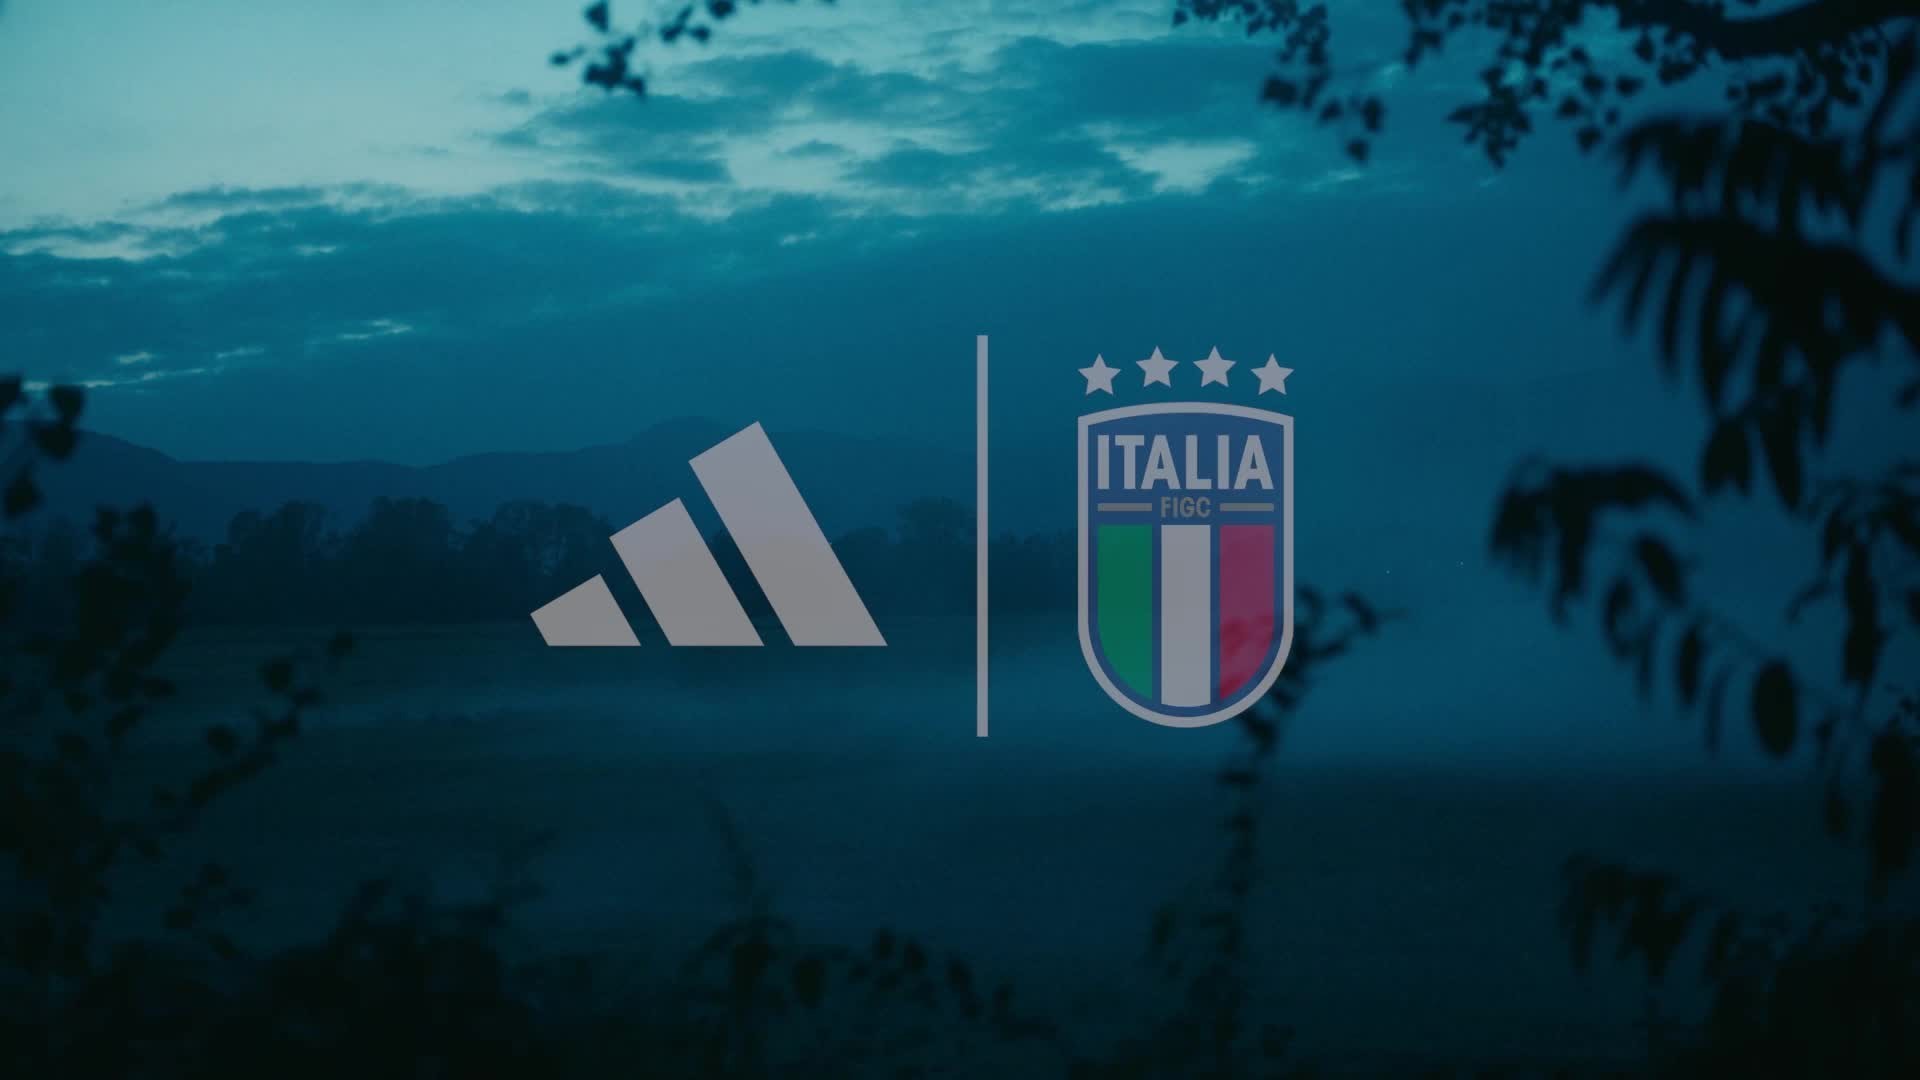 Adidas And Figc Present The New Football Kits Of Italian